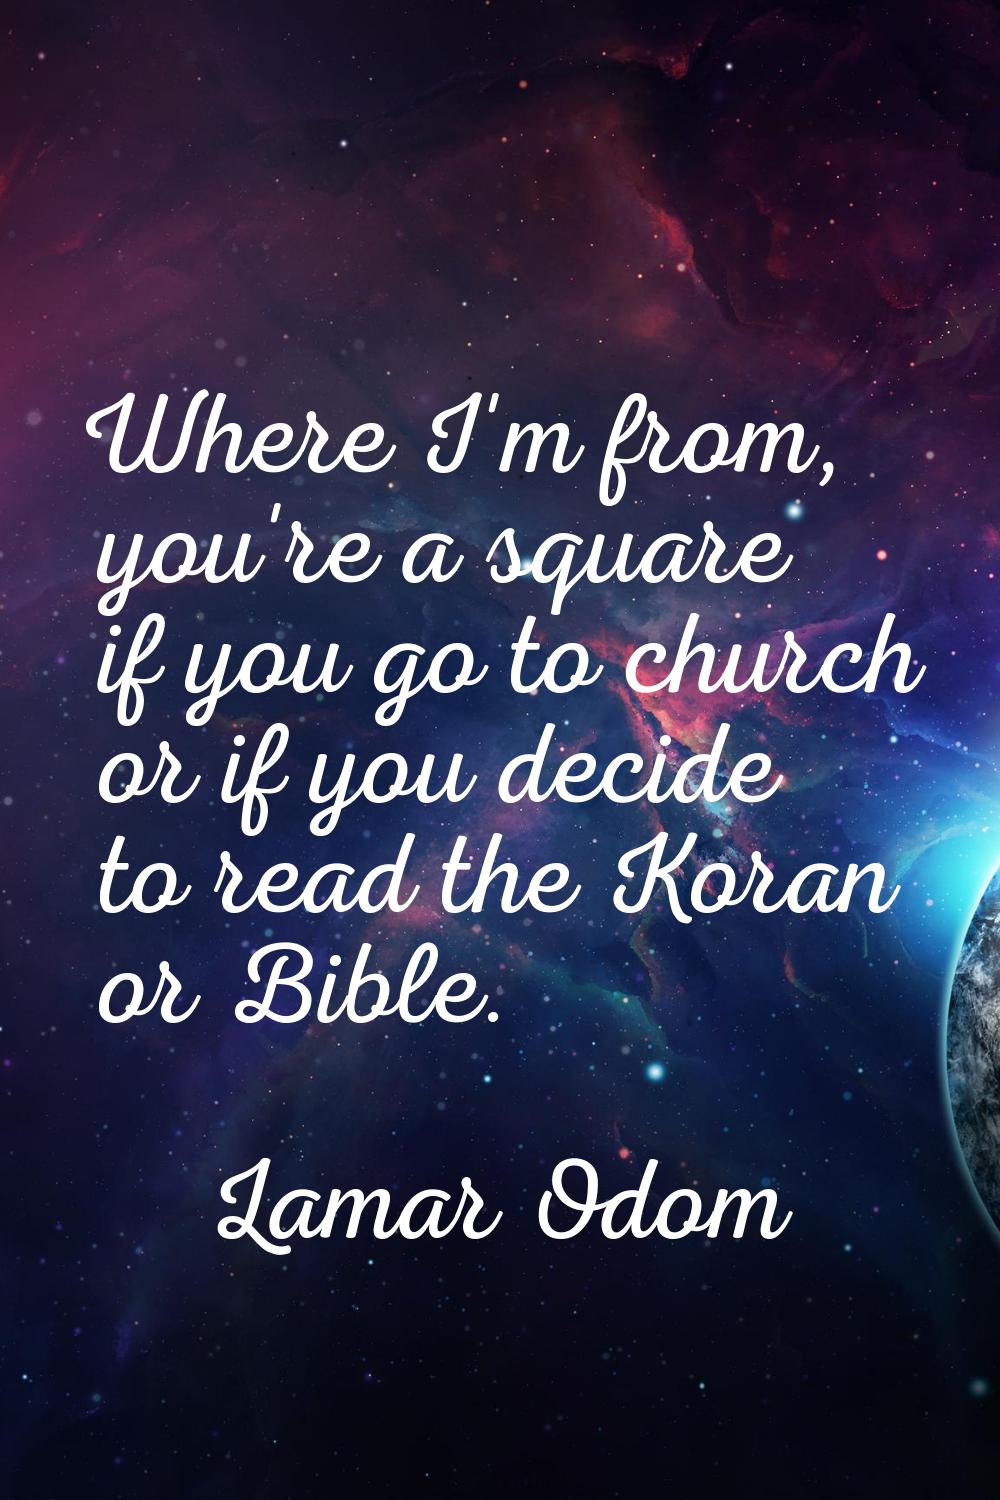 Where I'm from, you're a square if you go to church or if you decide to read the Koran or Bible.